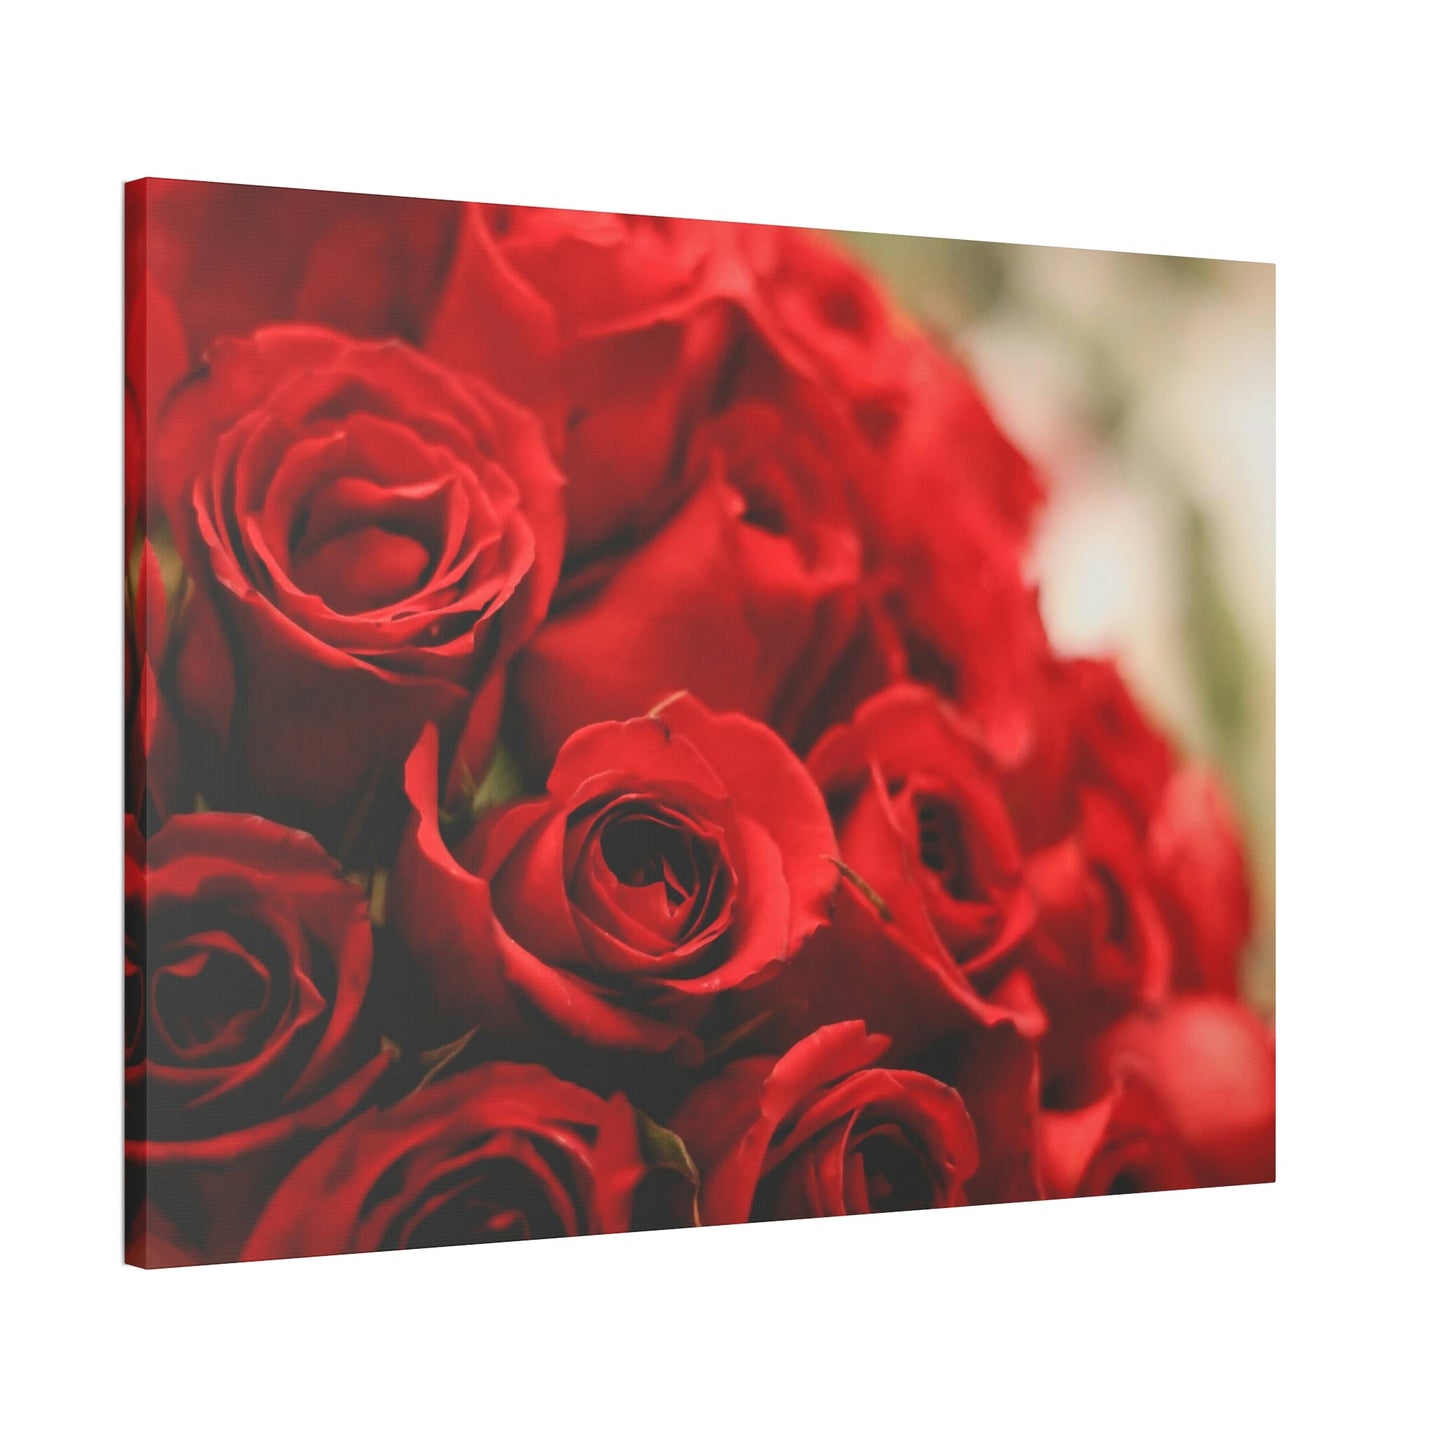 The Beauty of Roses: A Realistic Painting on Canvas